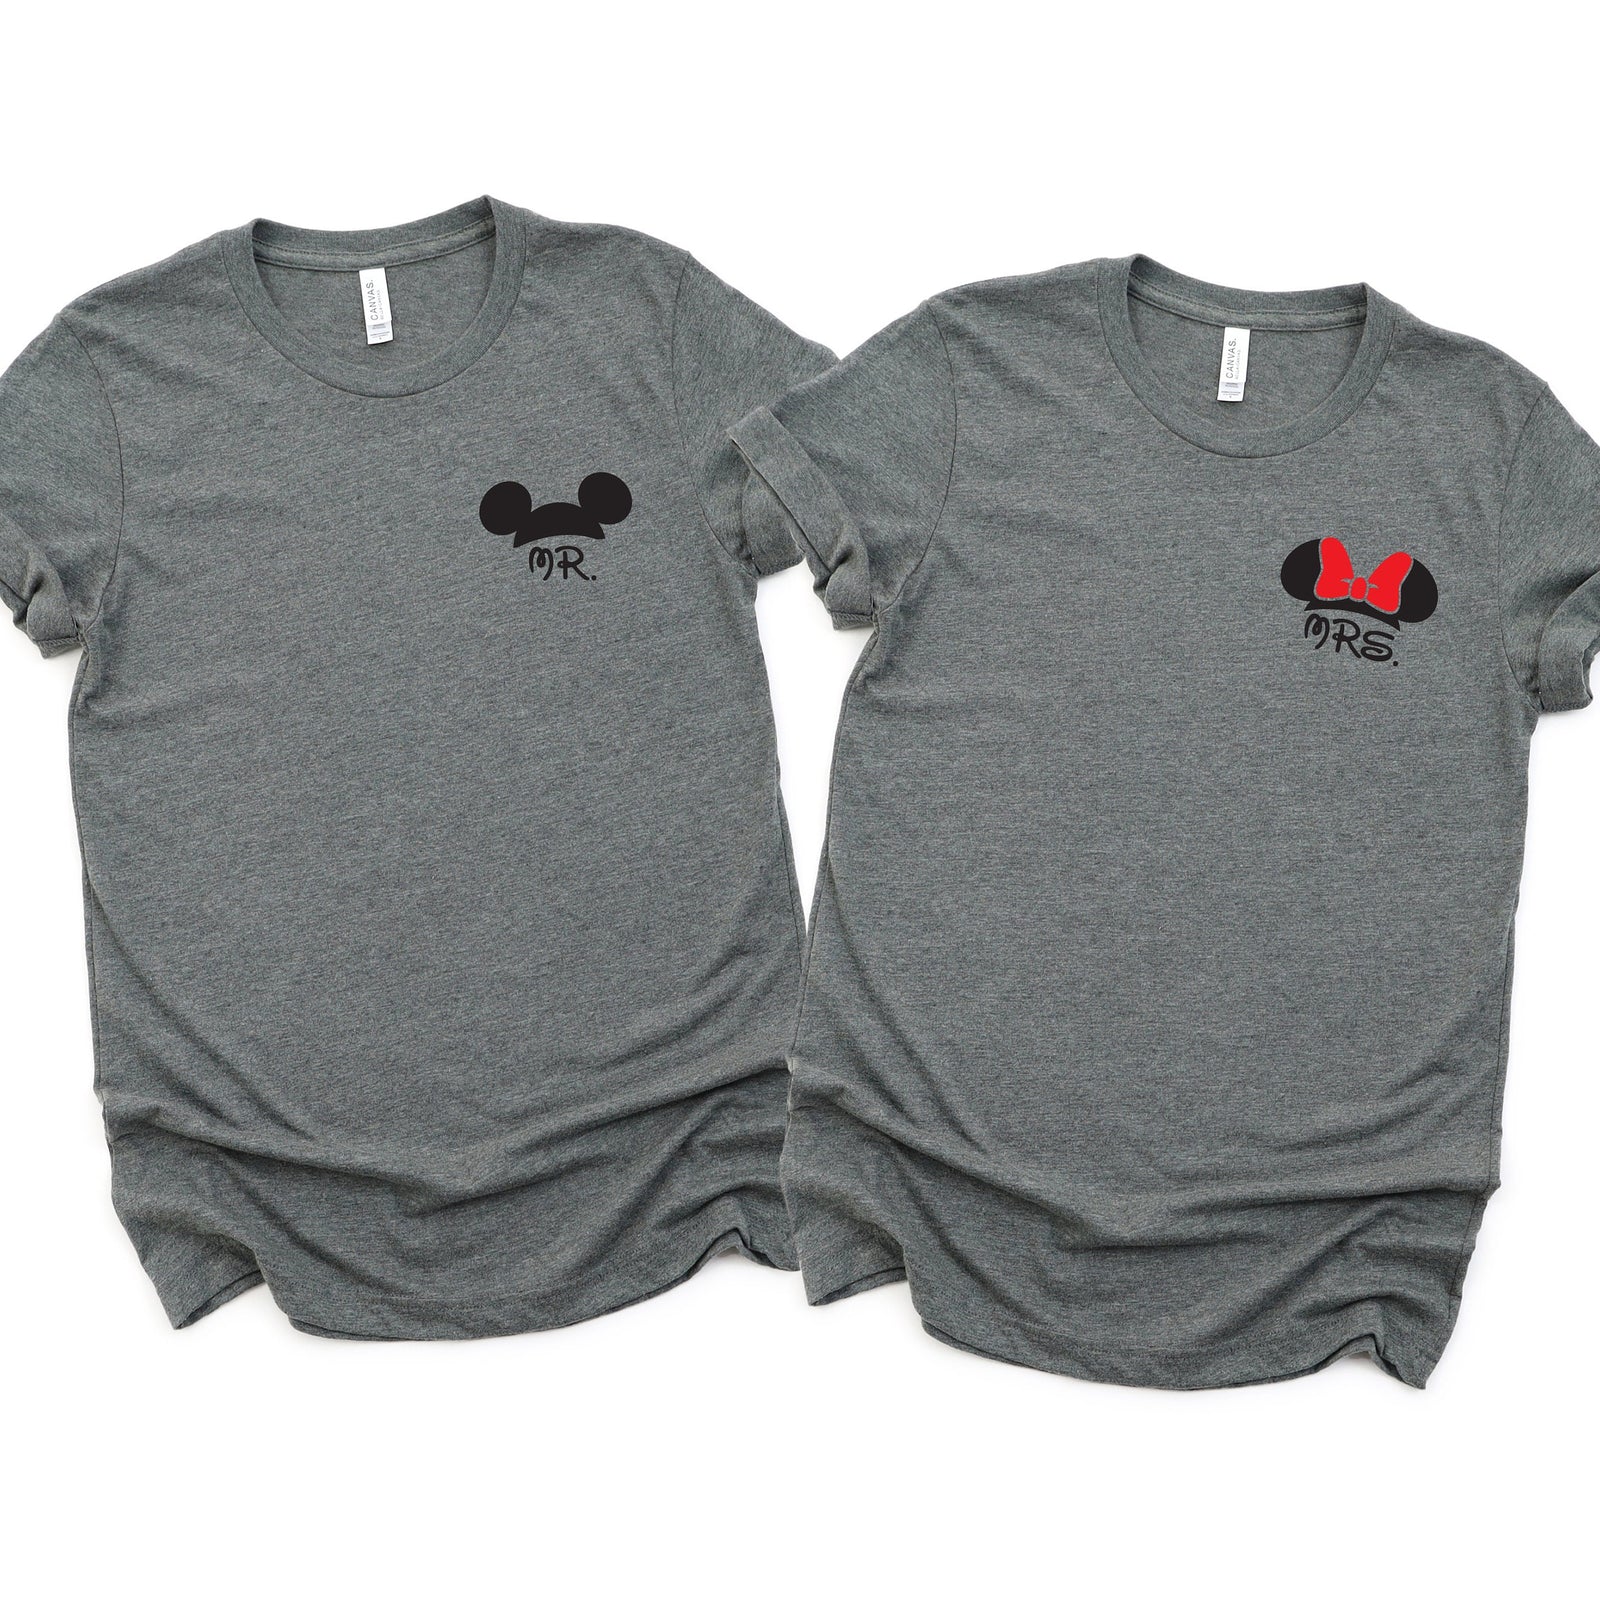 Mr. and Mrs. - Just Married - Disney Couples Matching Unisex T Shirts - Mickey and Minnie Mouse - Anniversary - Honey Moon - Disney Moon